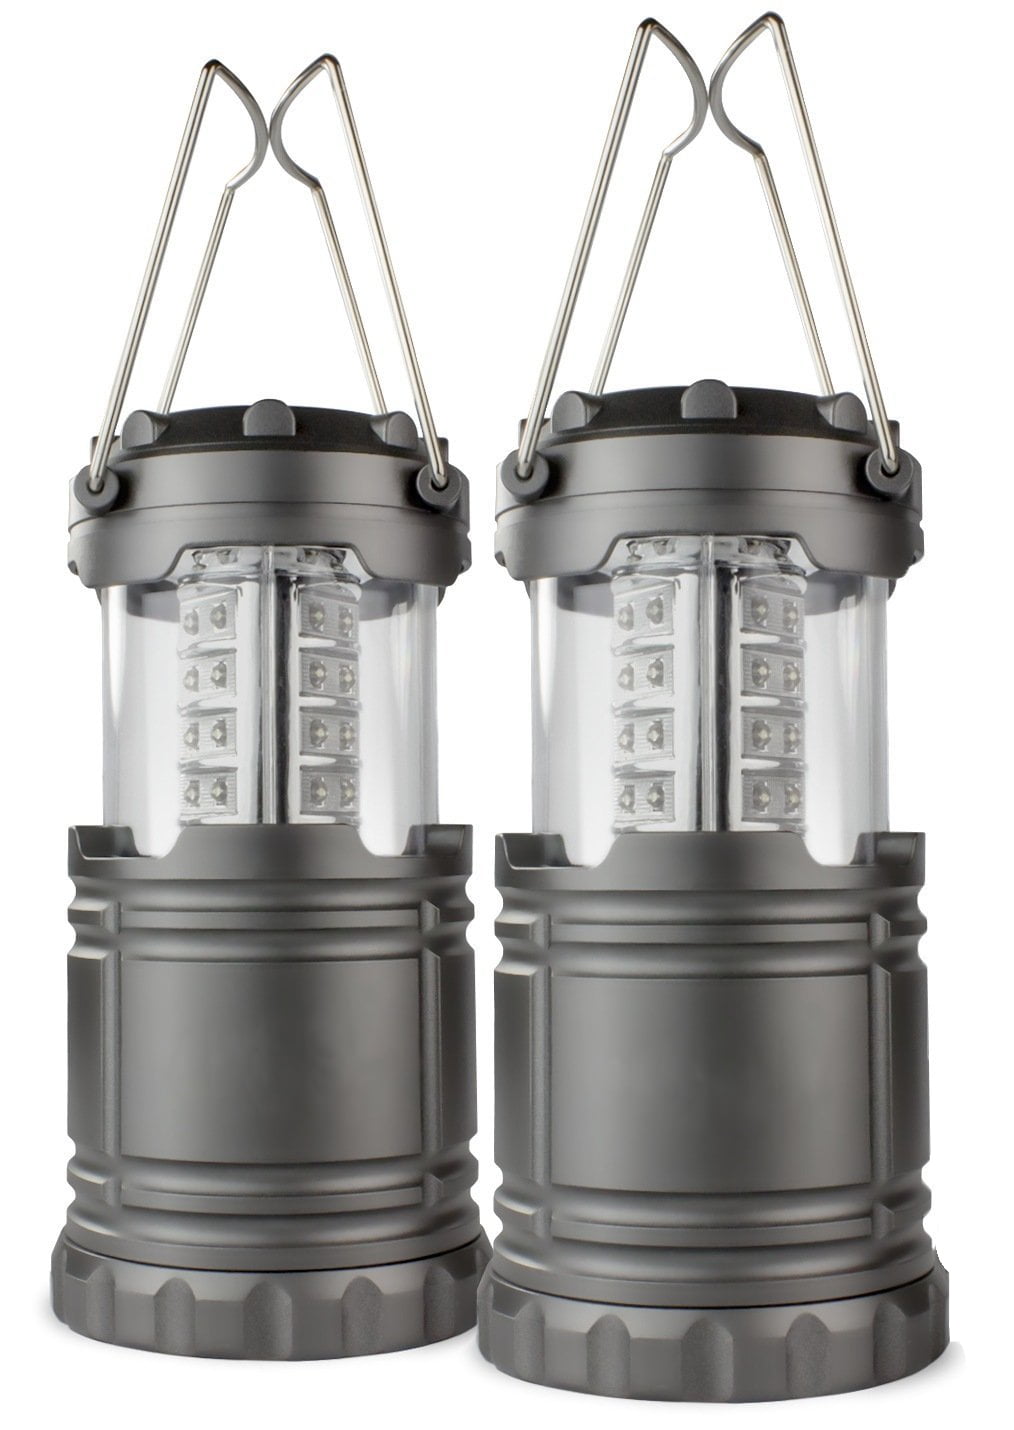 Camping Lantern Hiking Light 30 LED Lamp Portable 2 Color Available 